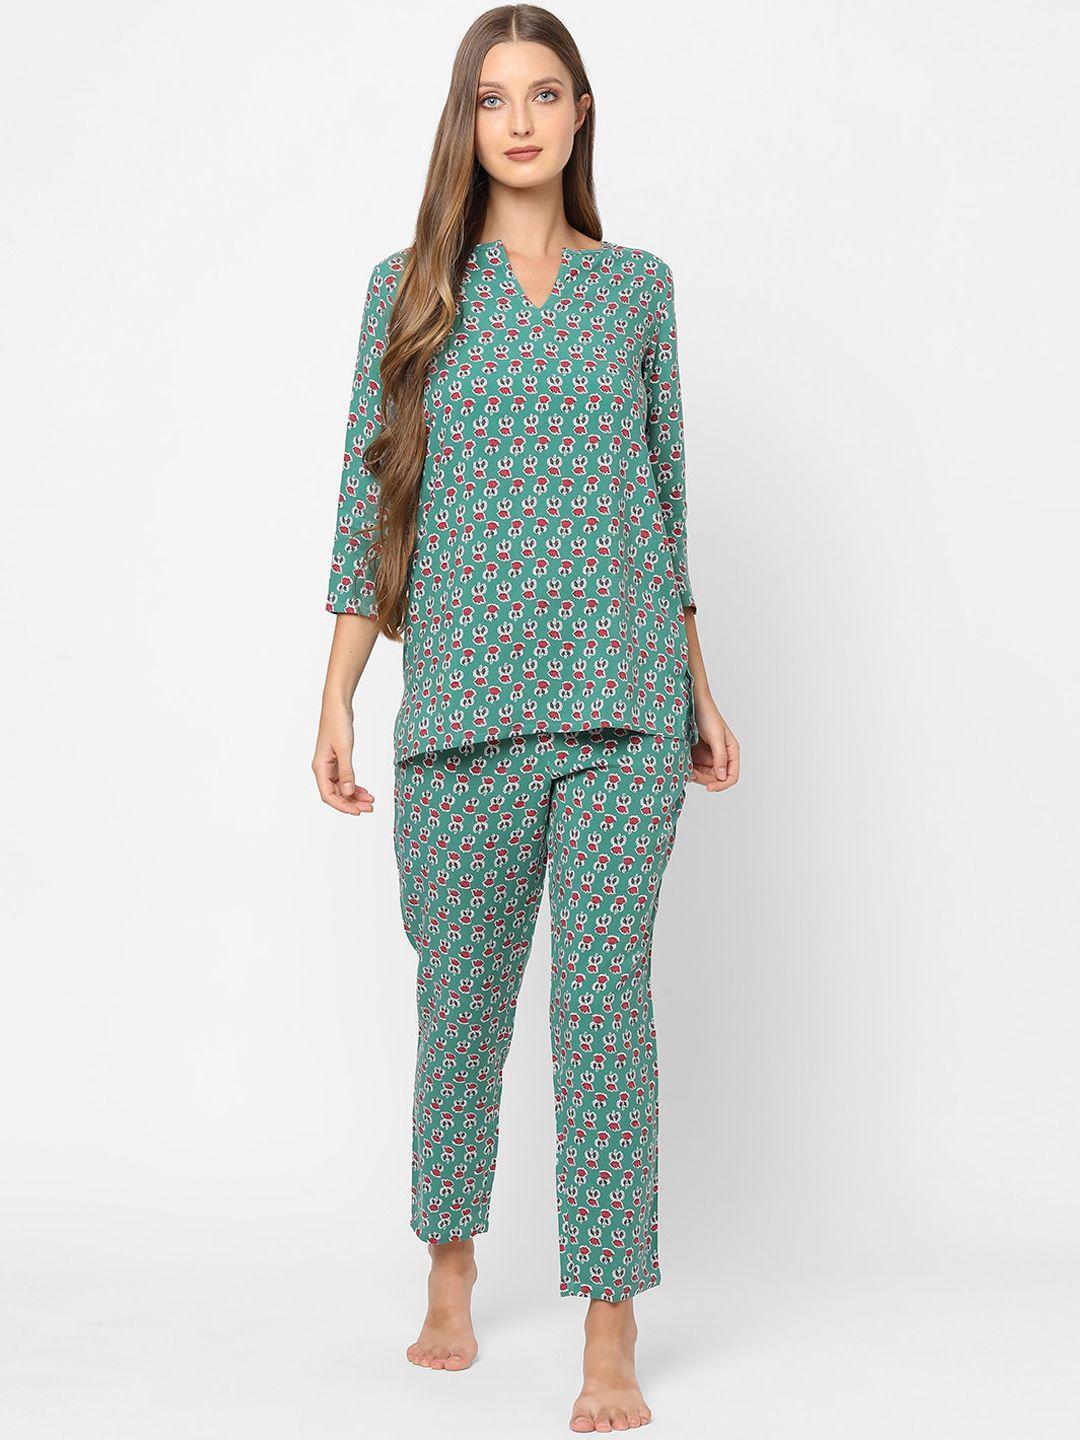 maysixty-women-green-printed-night-suit